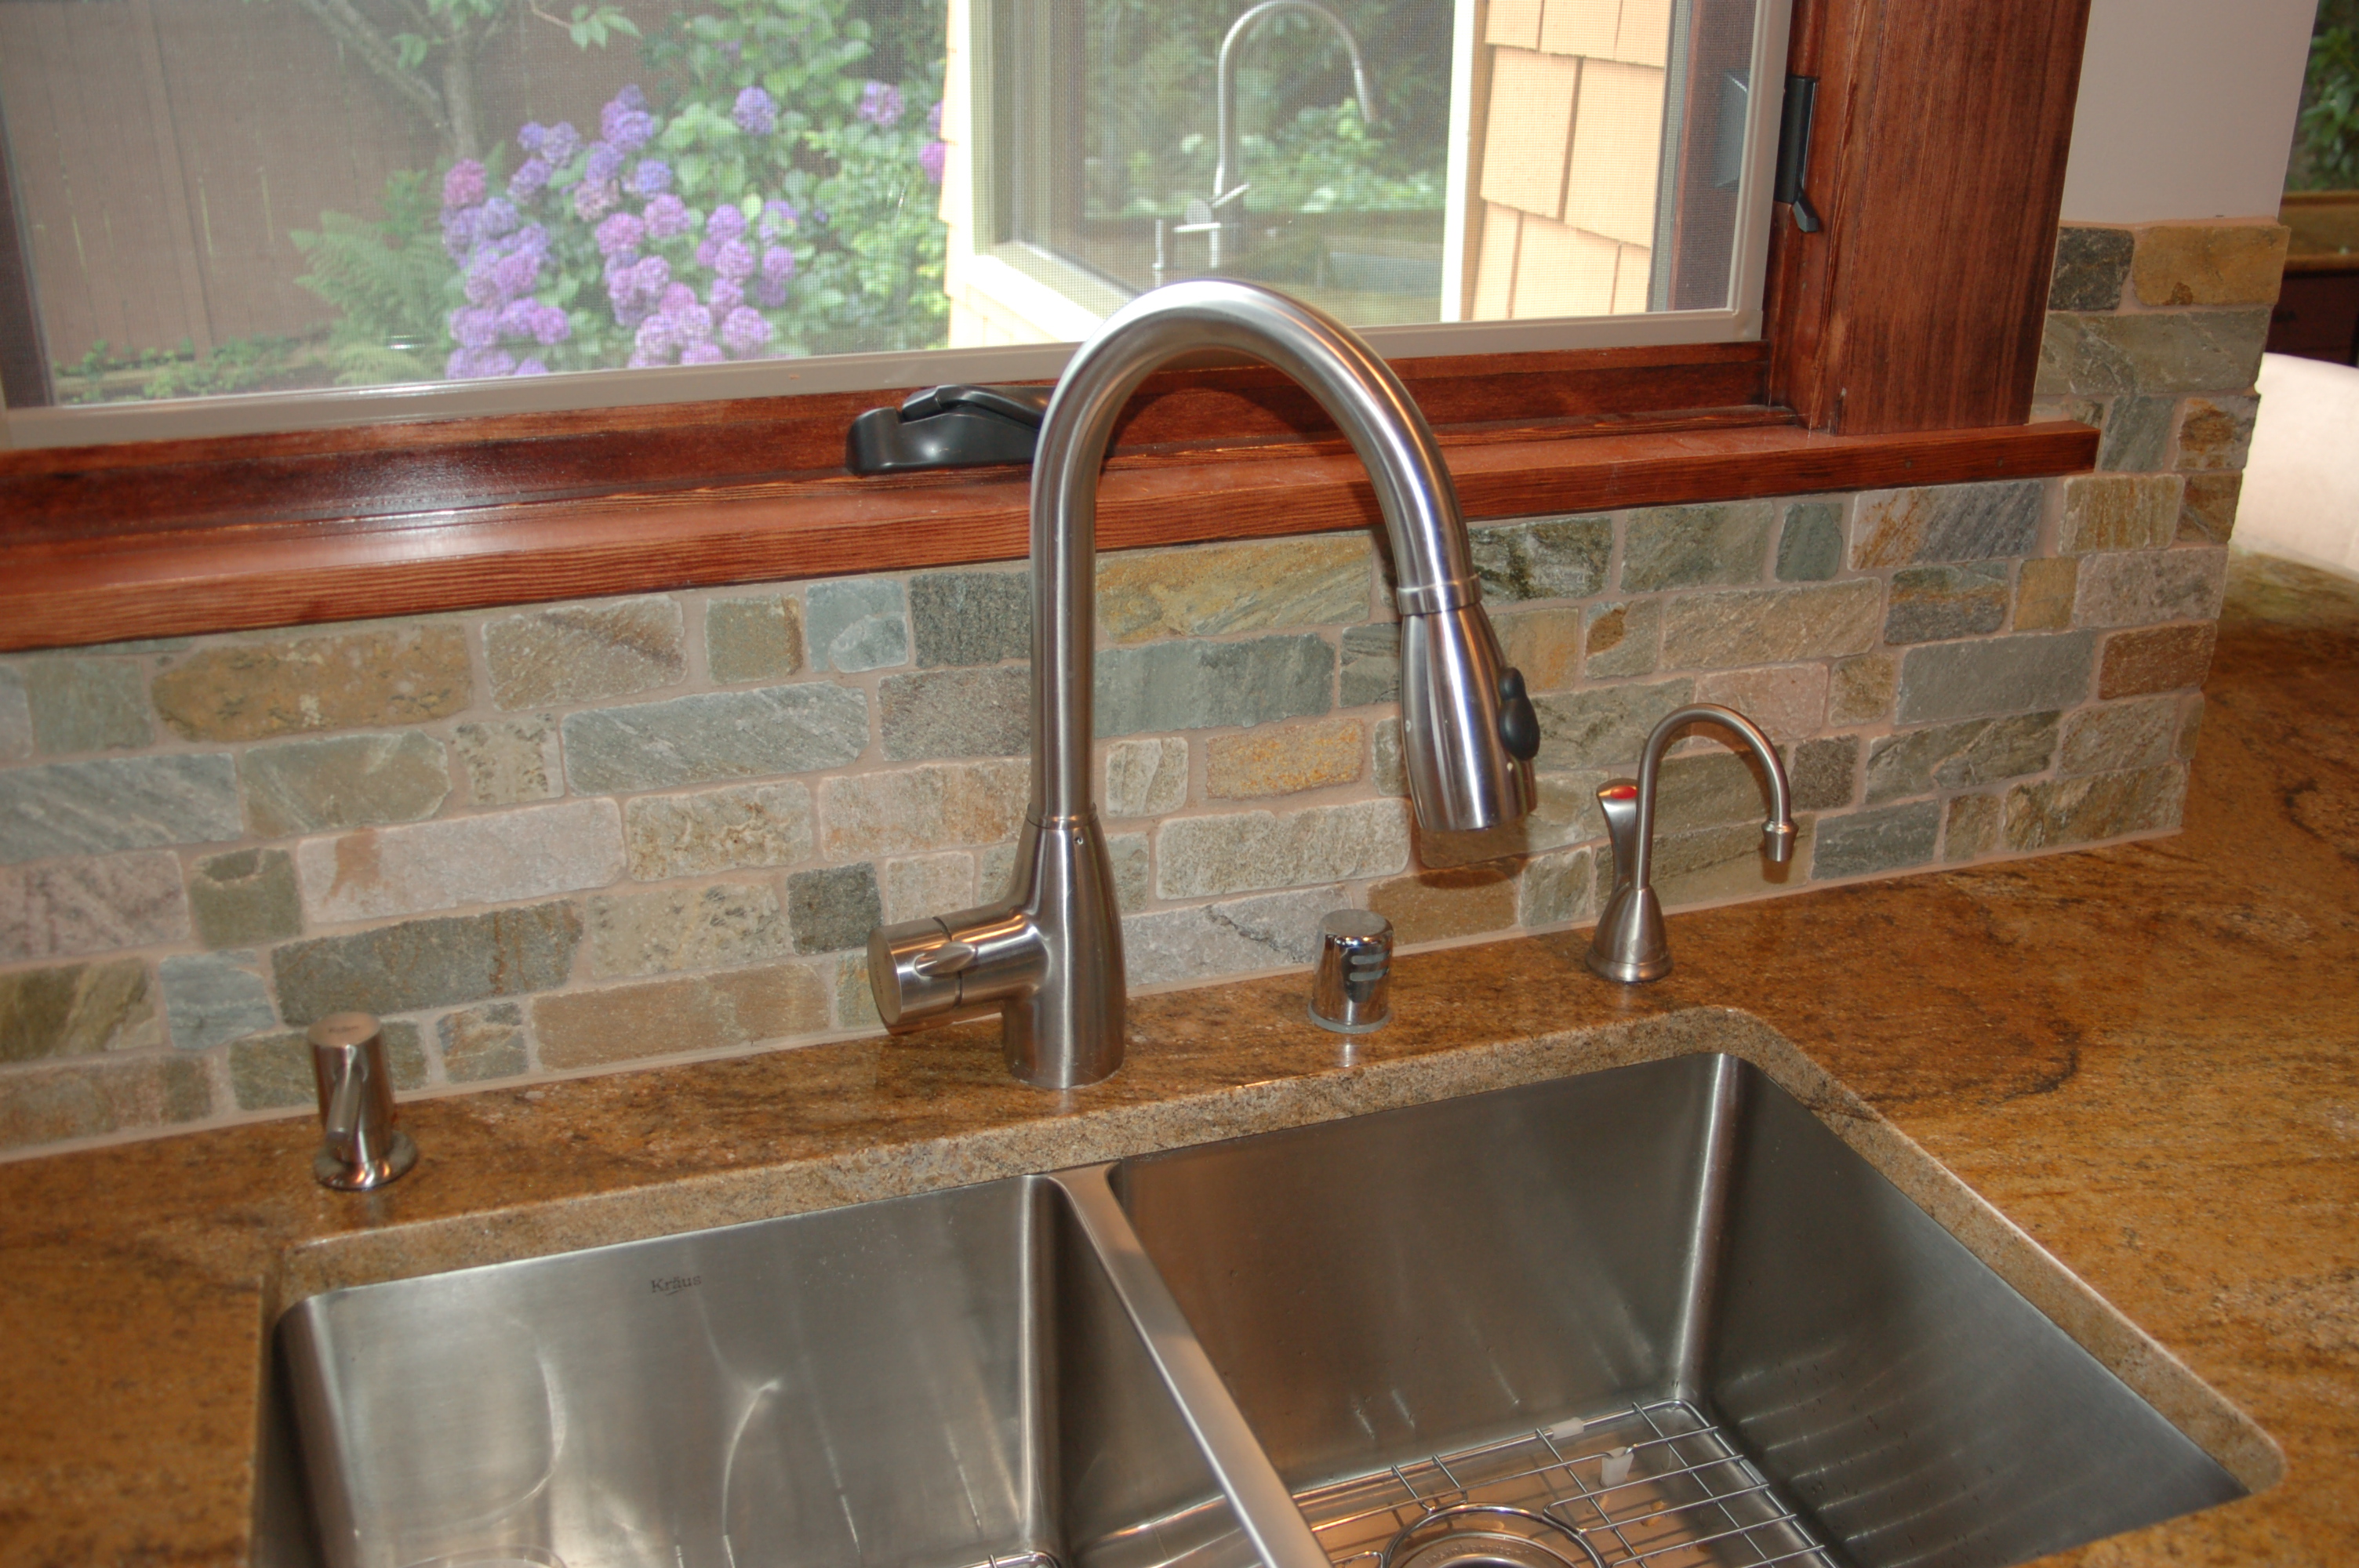 kitchen sinks sink undermount faucet countertop granite steel stainless counter countertops backsplash construction rose inc compartment two mind details pull